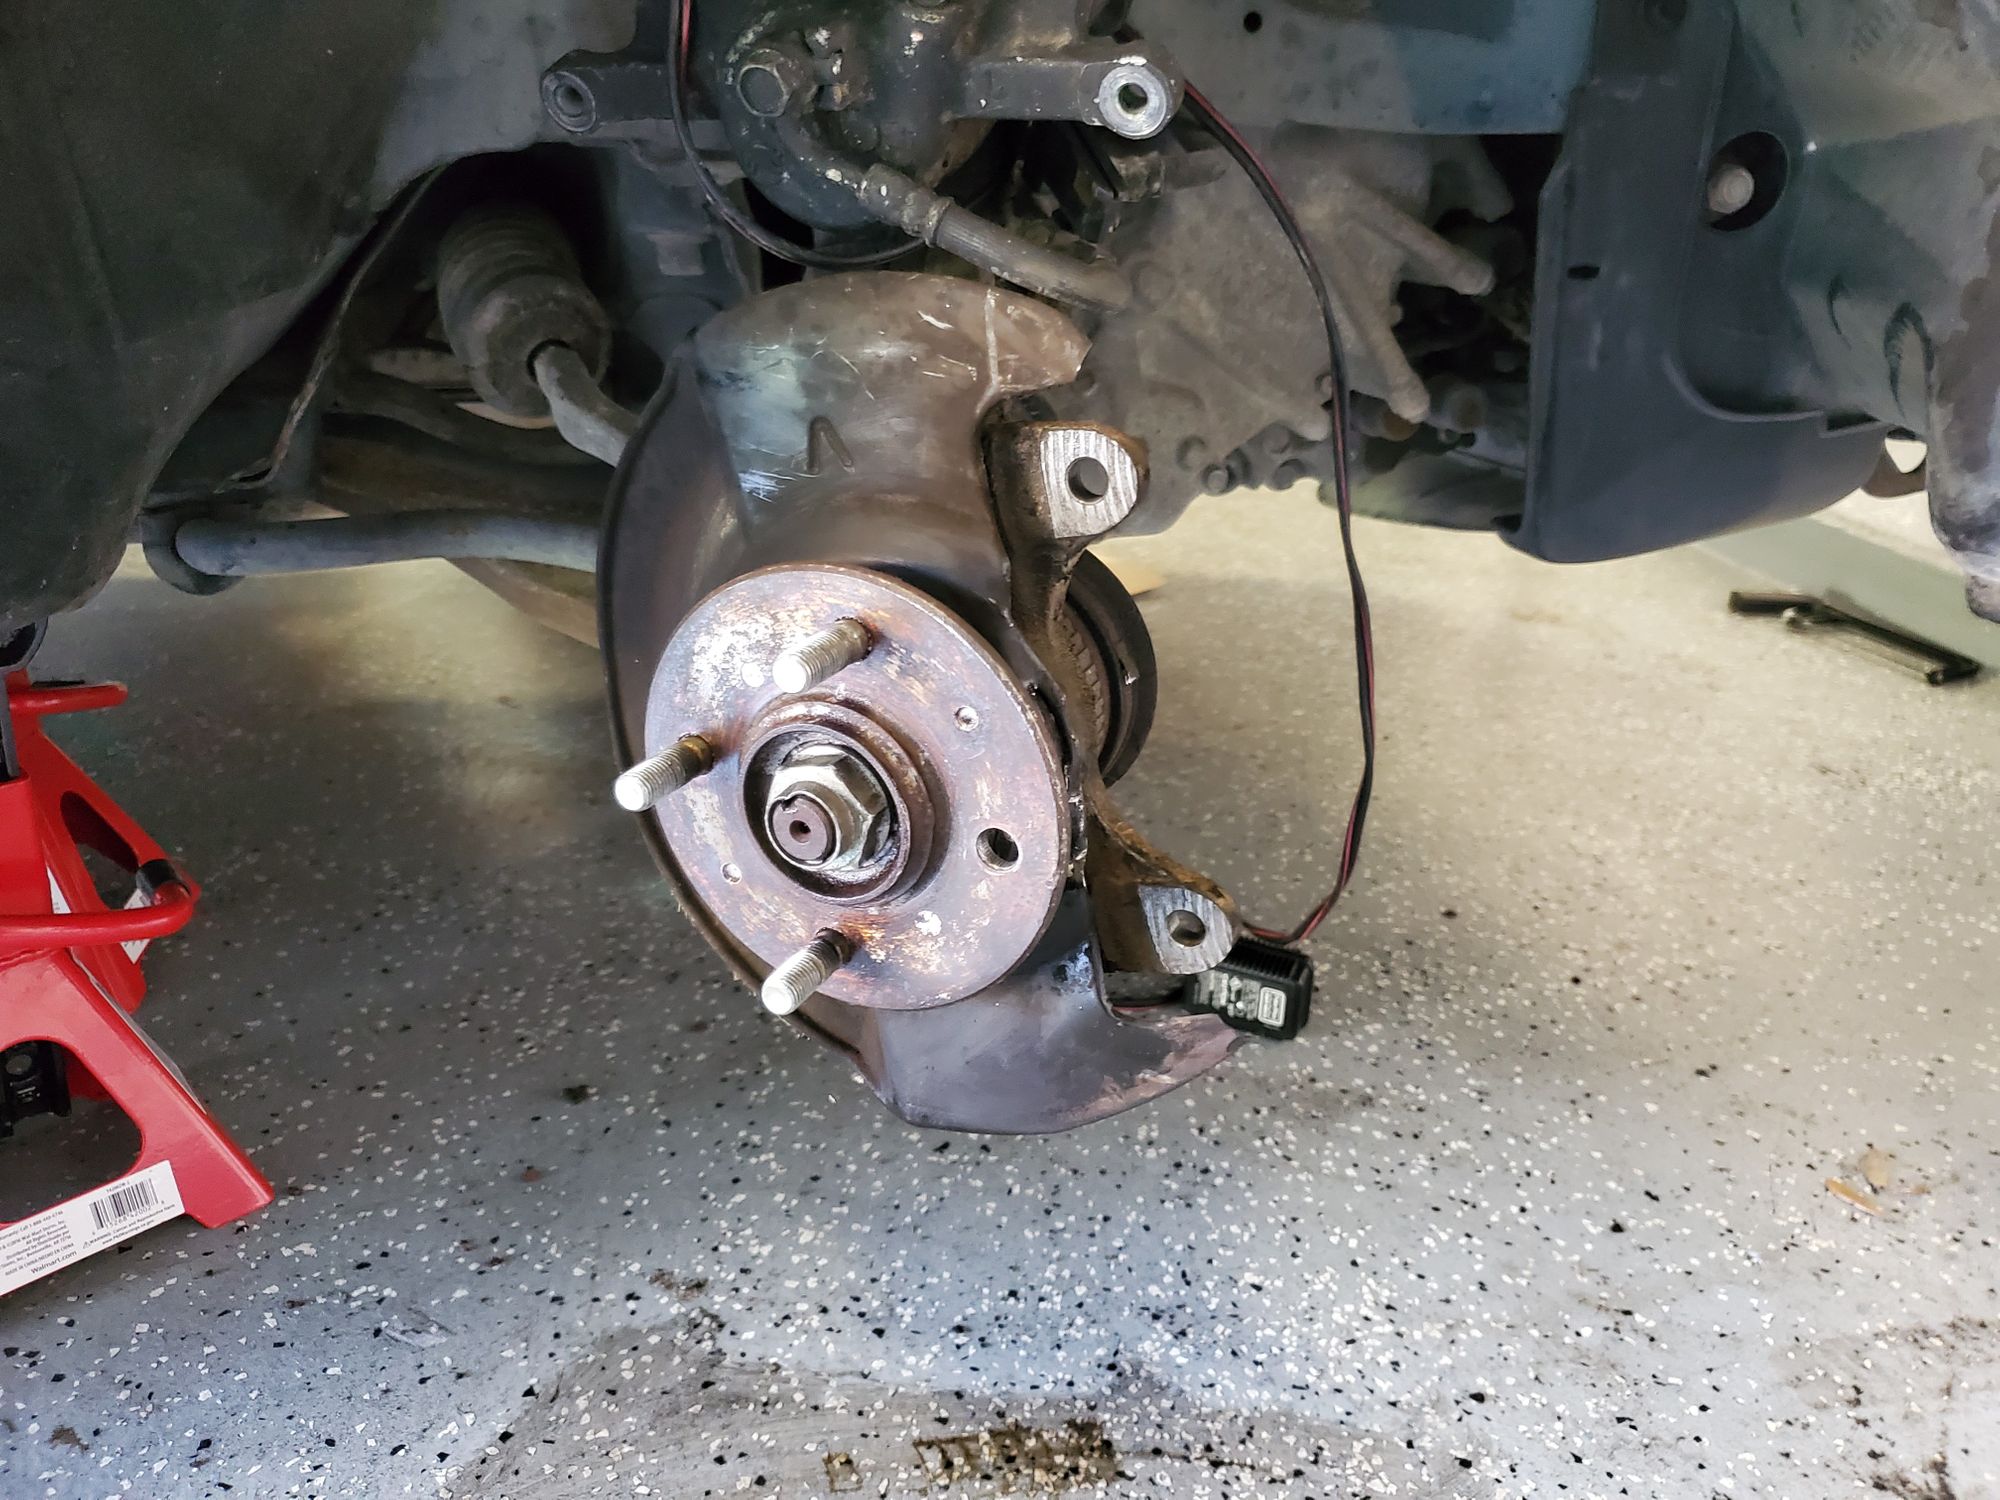 Replacing a Broken Lug Stud on my 1998 Civic Project